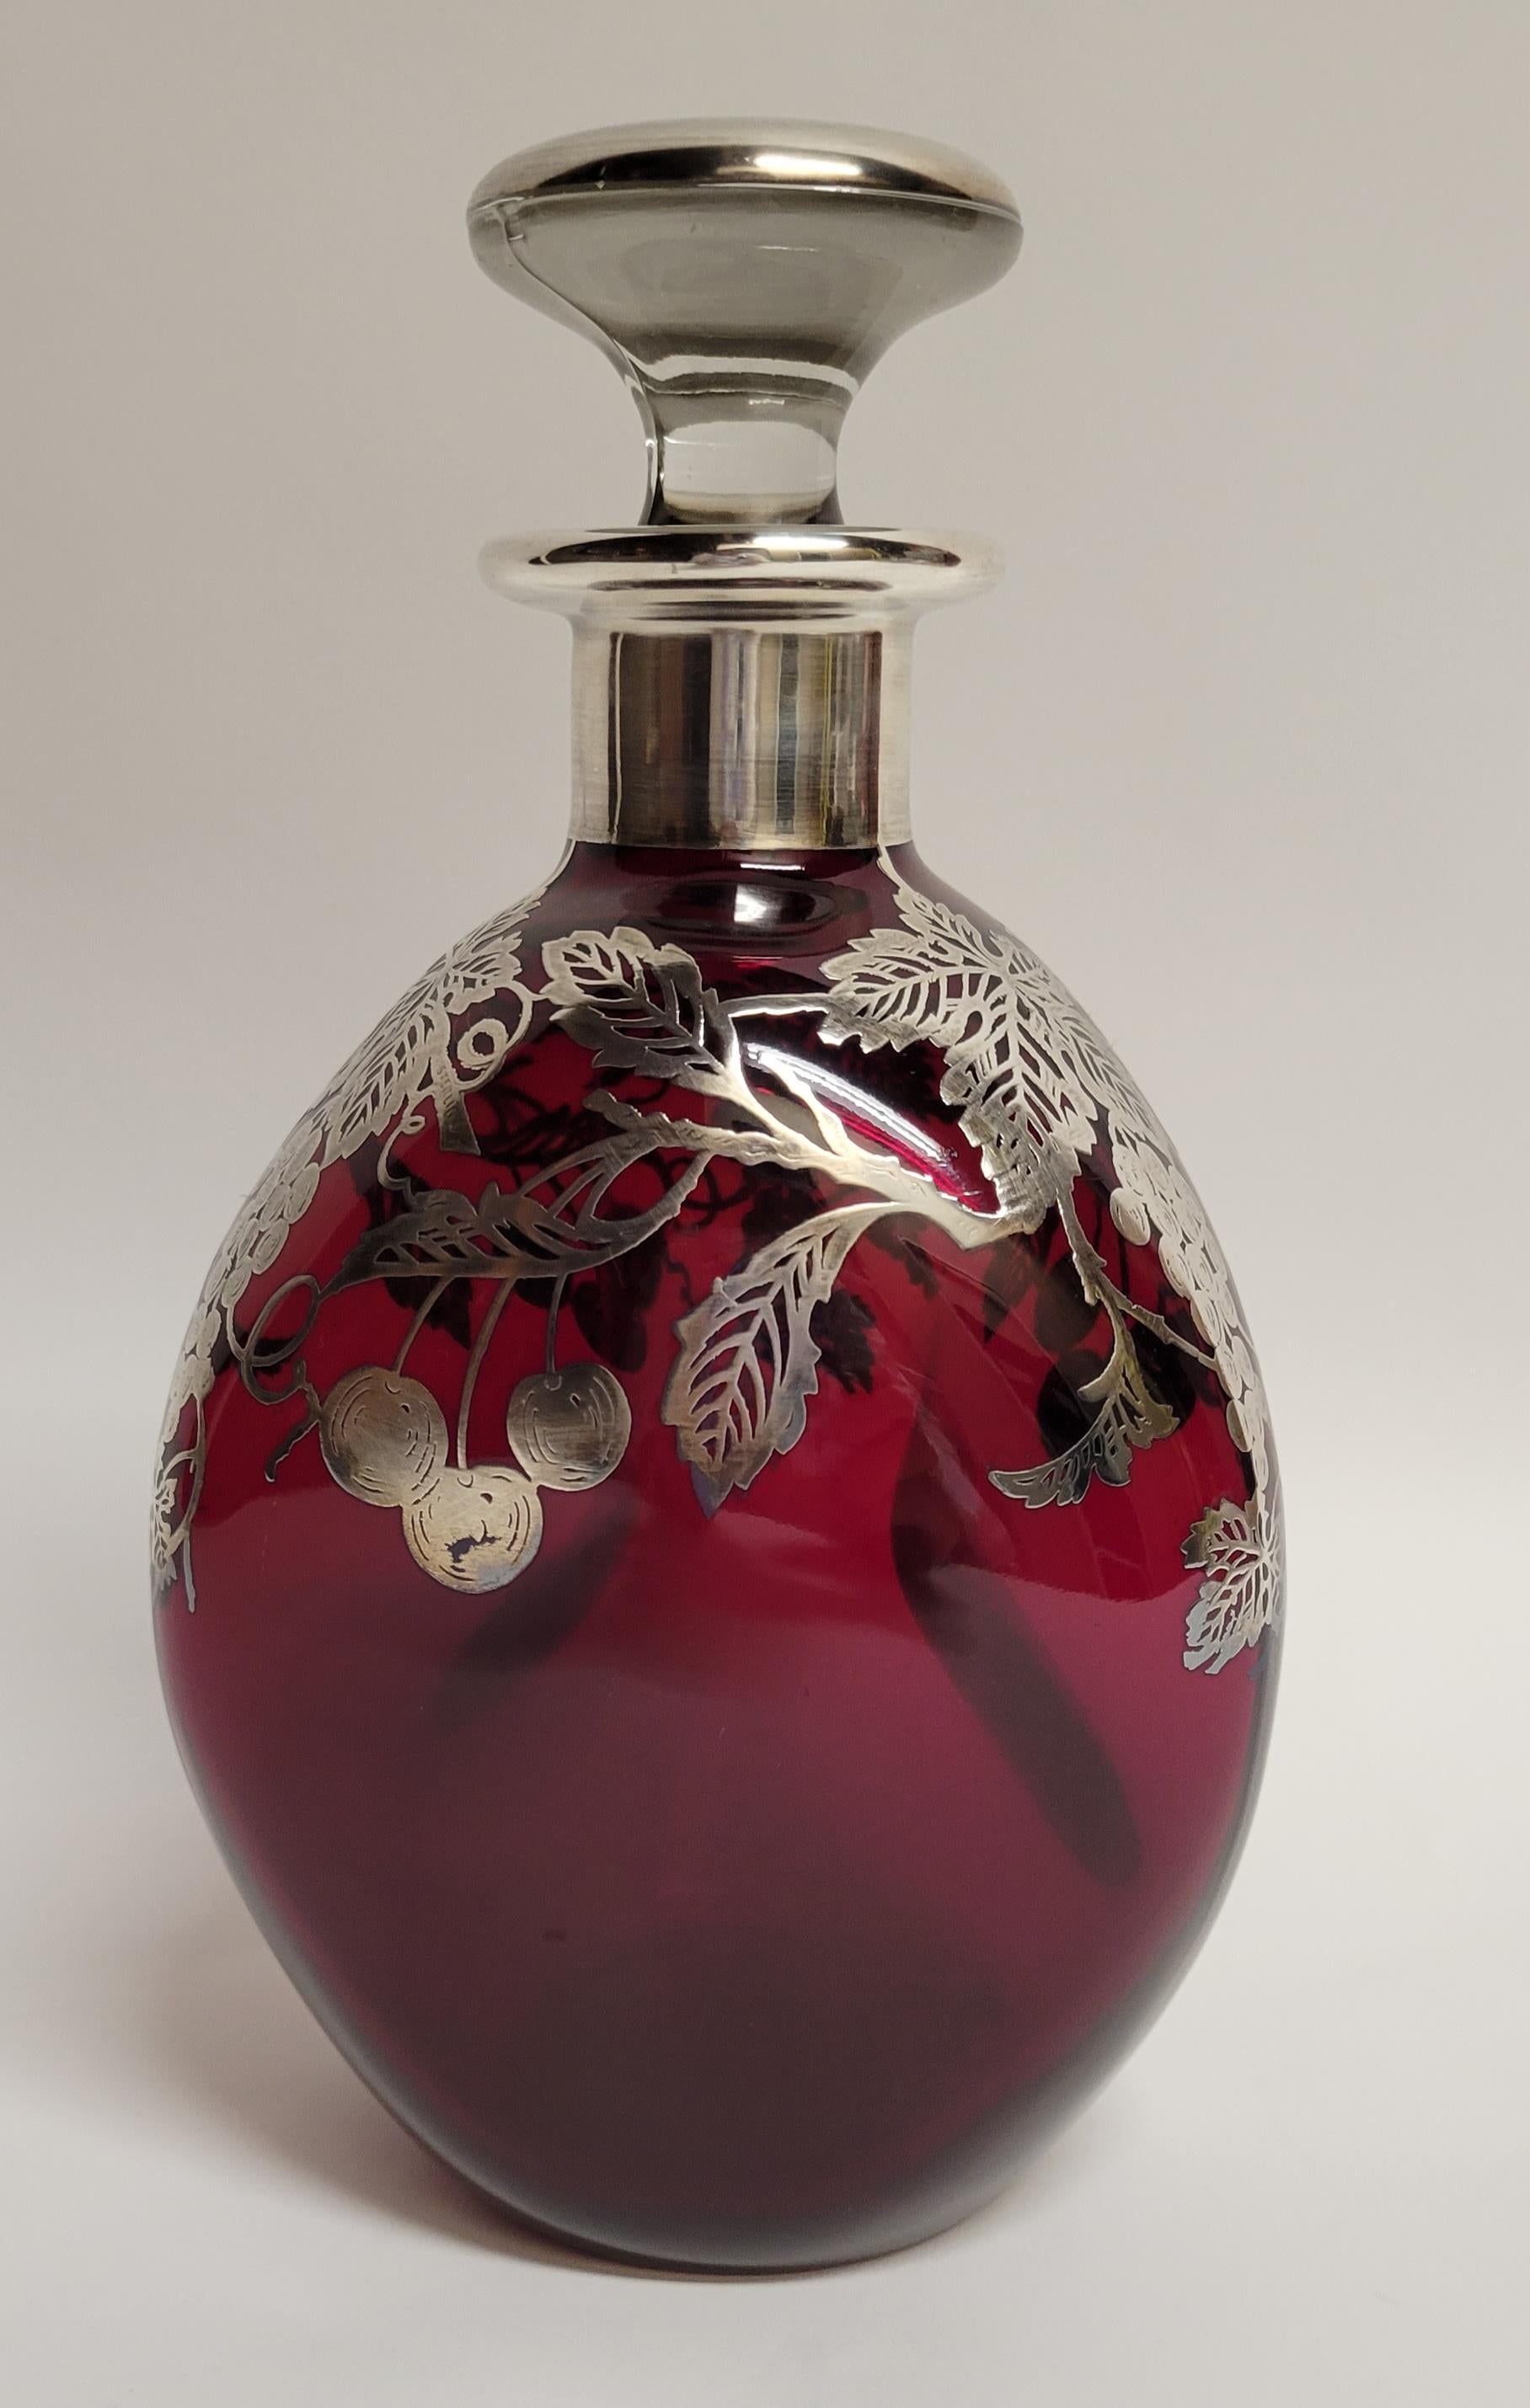 This is a lovely decanter, rich in color and the silver decoration is also nice. The glass was 